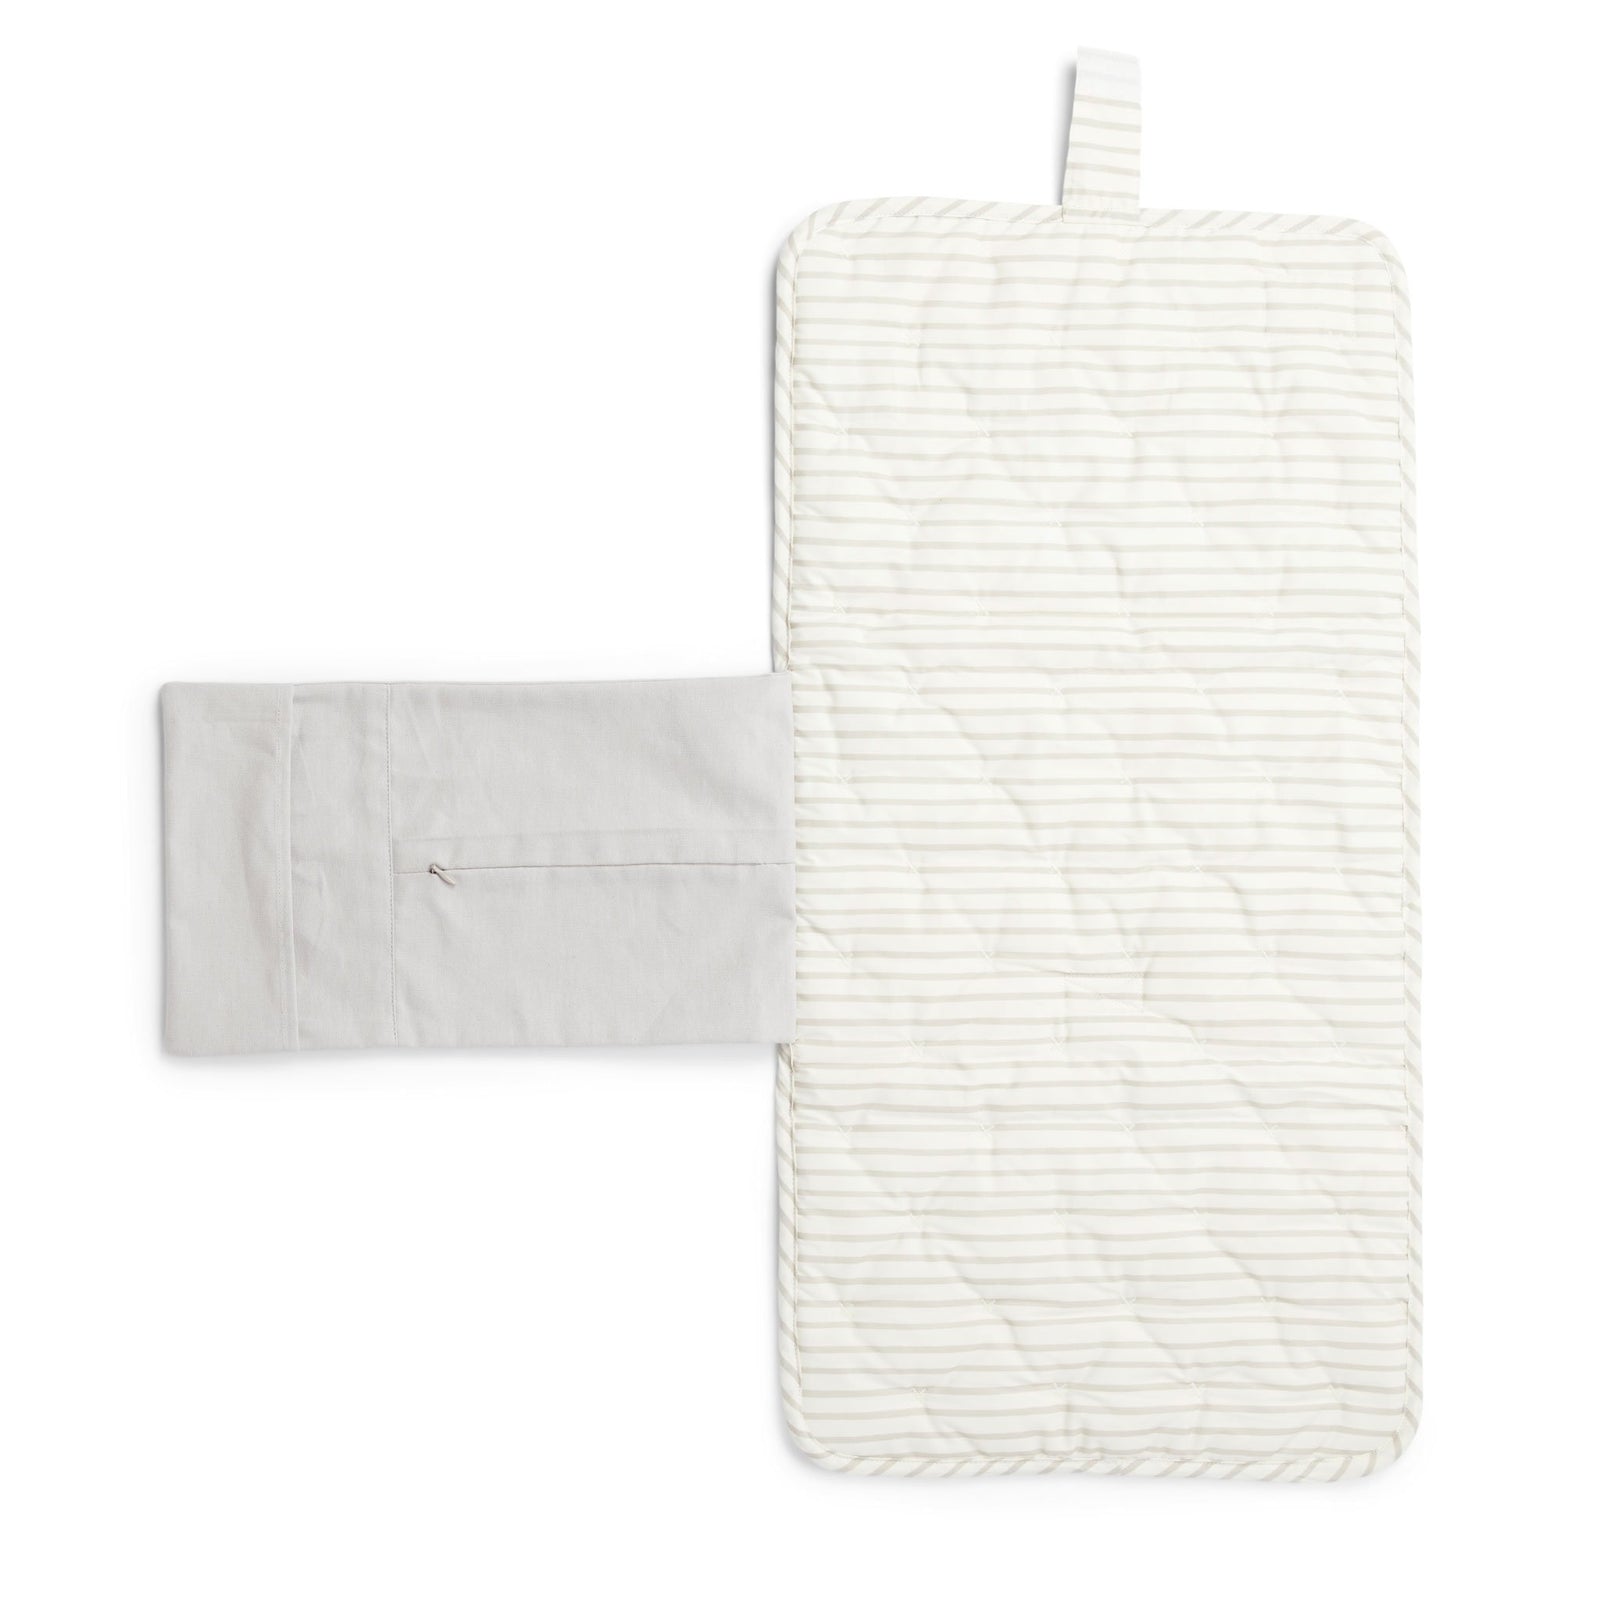 Pehr Pebble Organic On The Go Travel Change Pad opened up. GOTS Certified Organic Cotton & Dyes. White with light grey stripes.